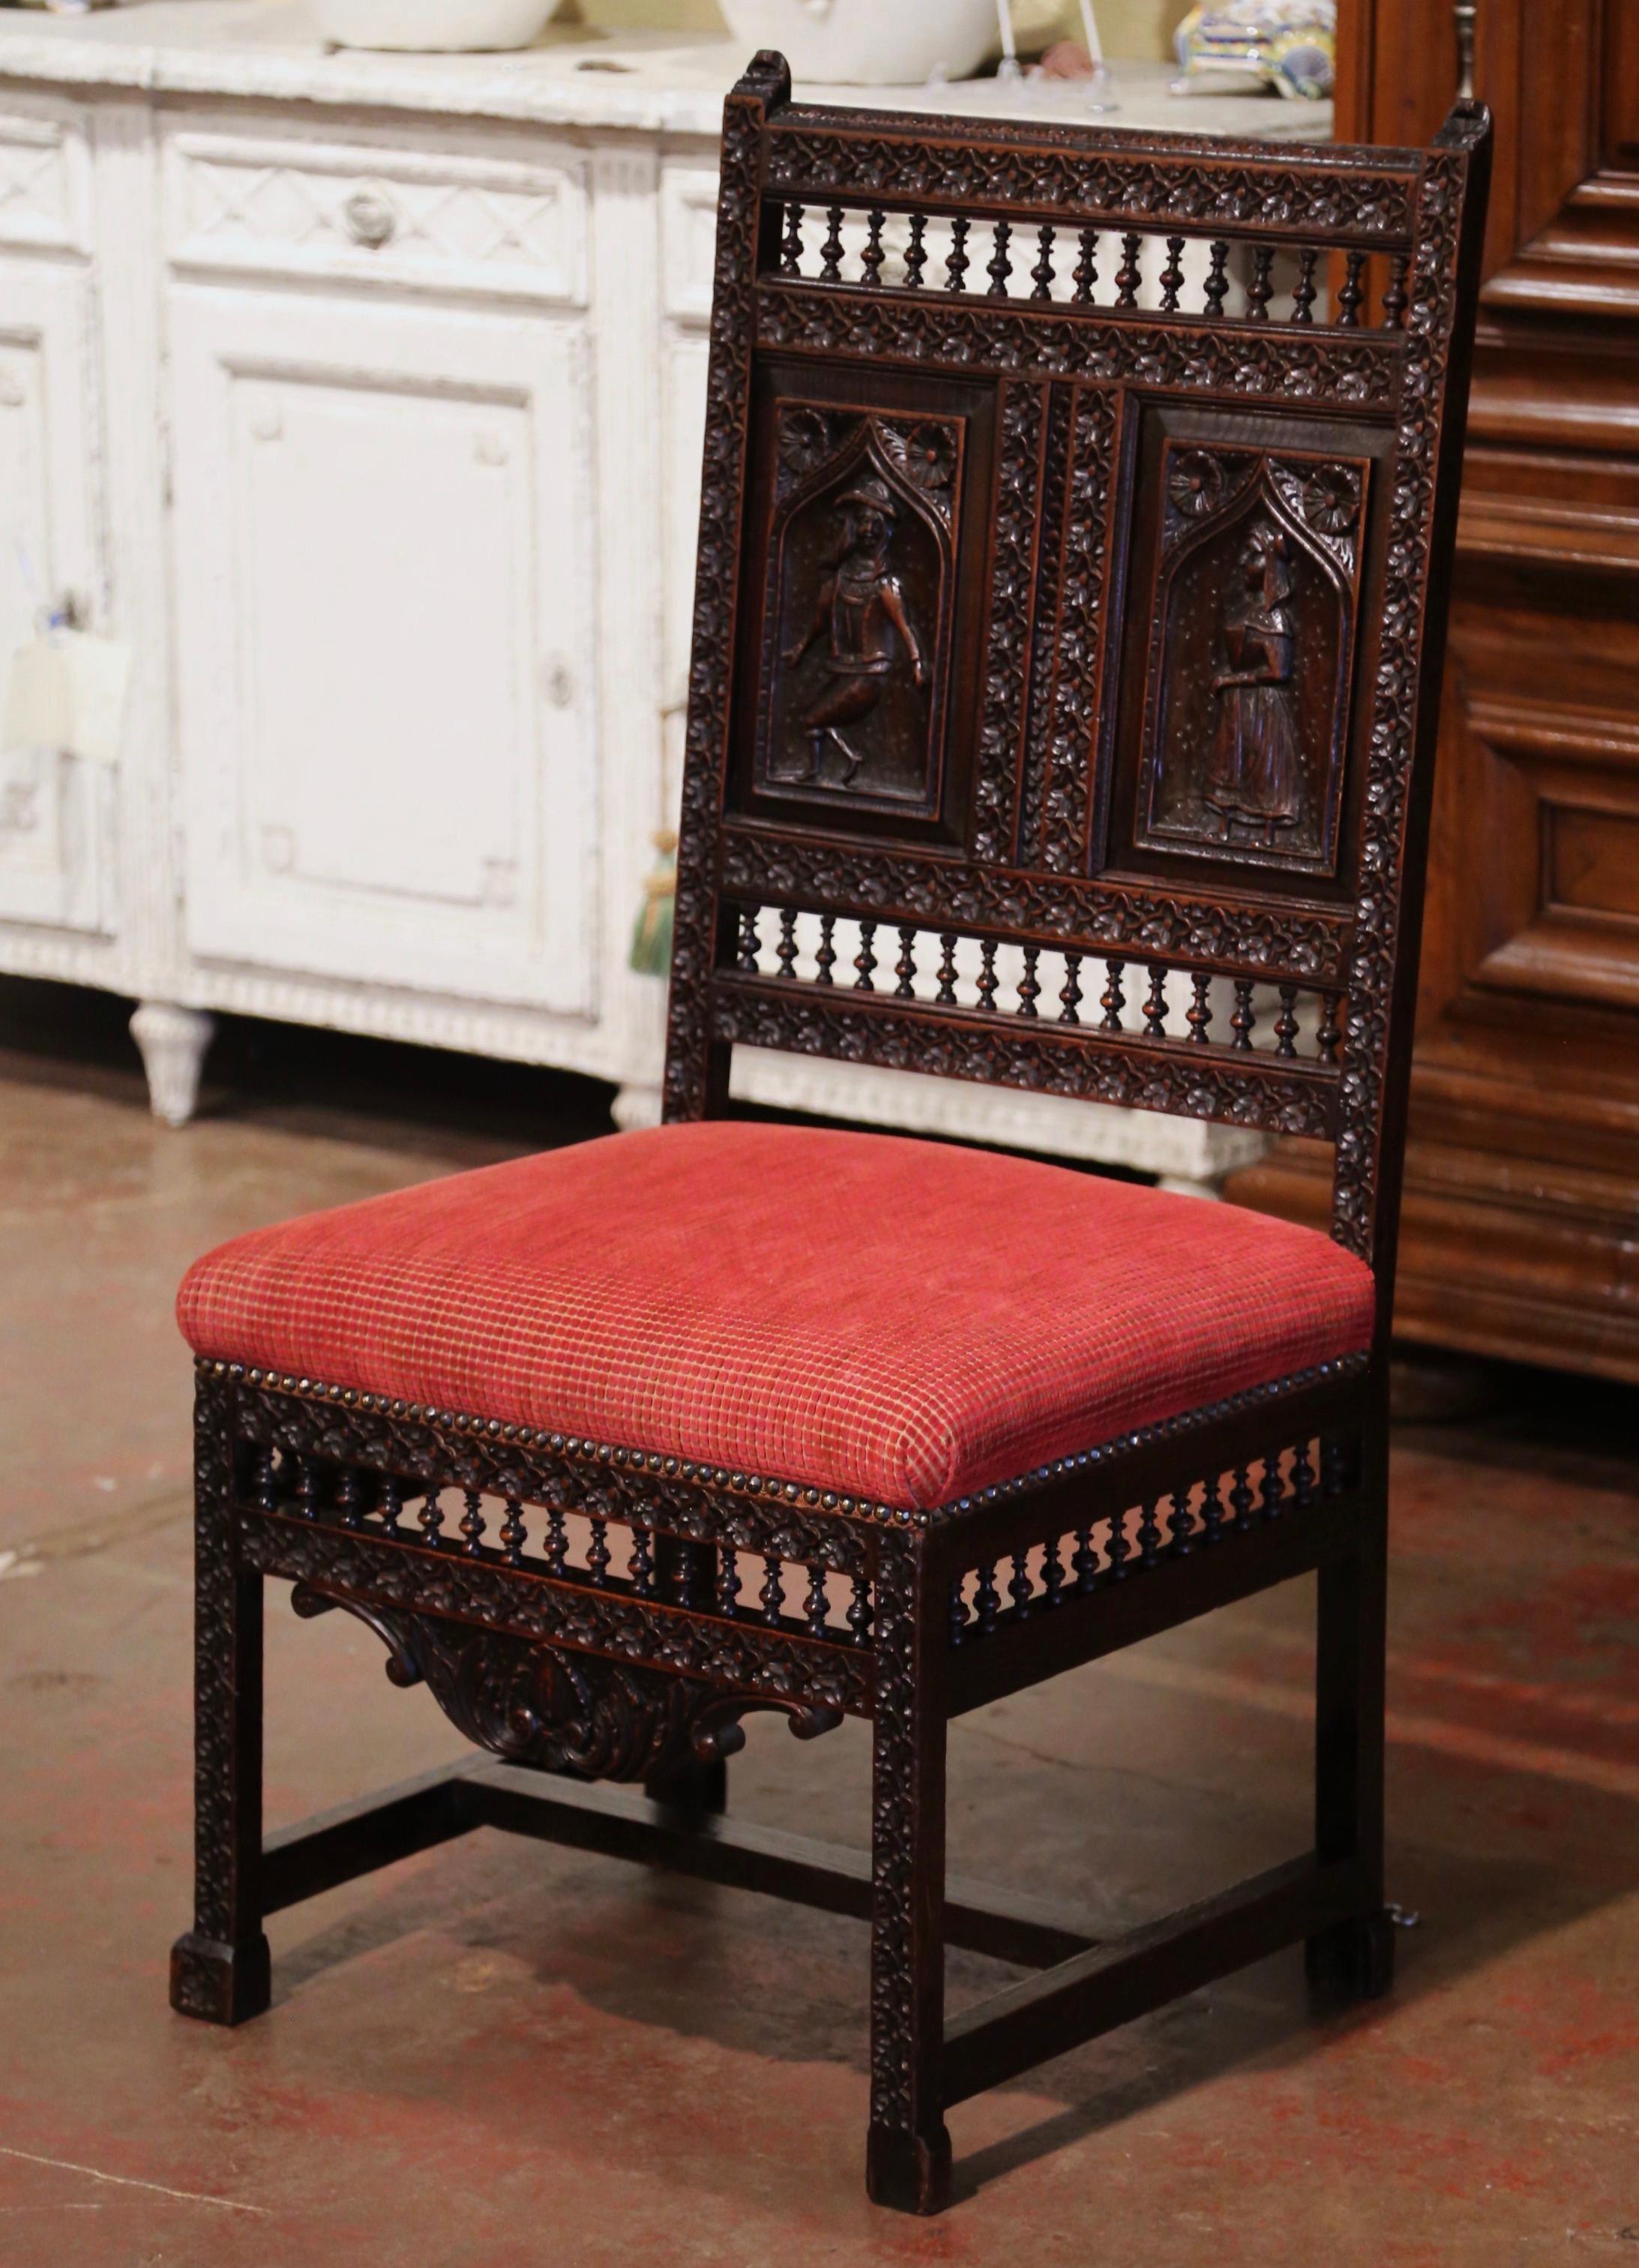 Decorate a hallway, bedroom or study with this elegant antique chair. Crafted in Brittany, France circa 1870, the large chair stands on carved straight legs ending with square feet over a scalloped apron decorated with spindles and floral and shell